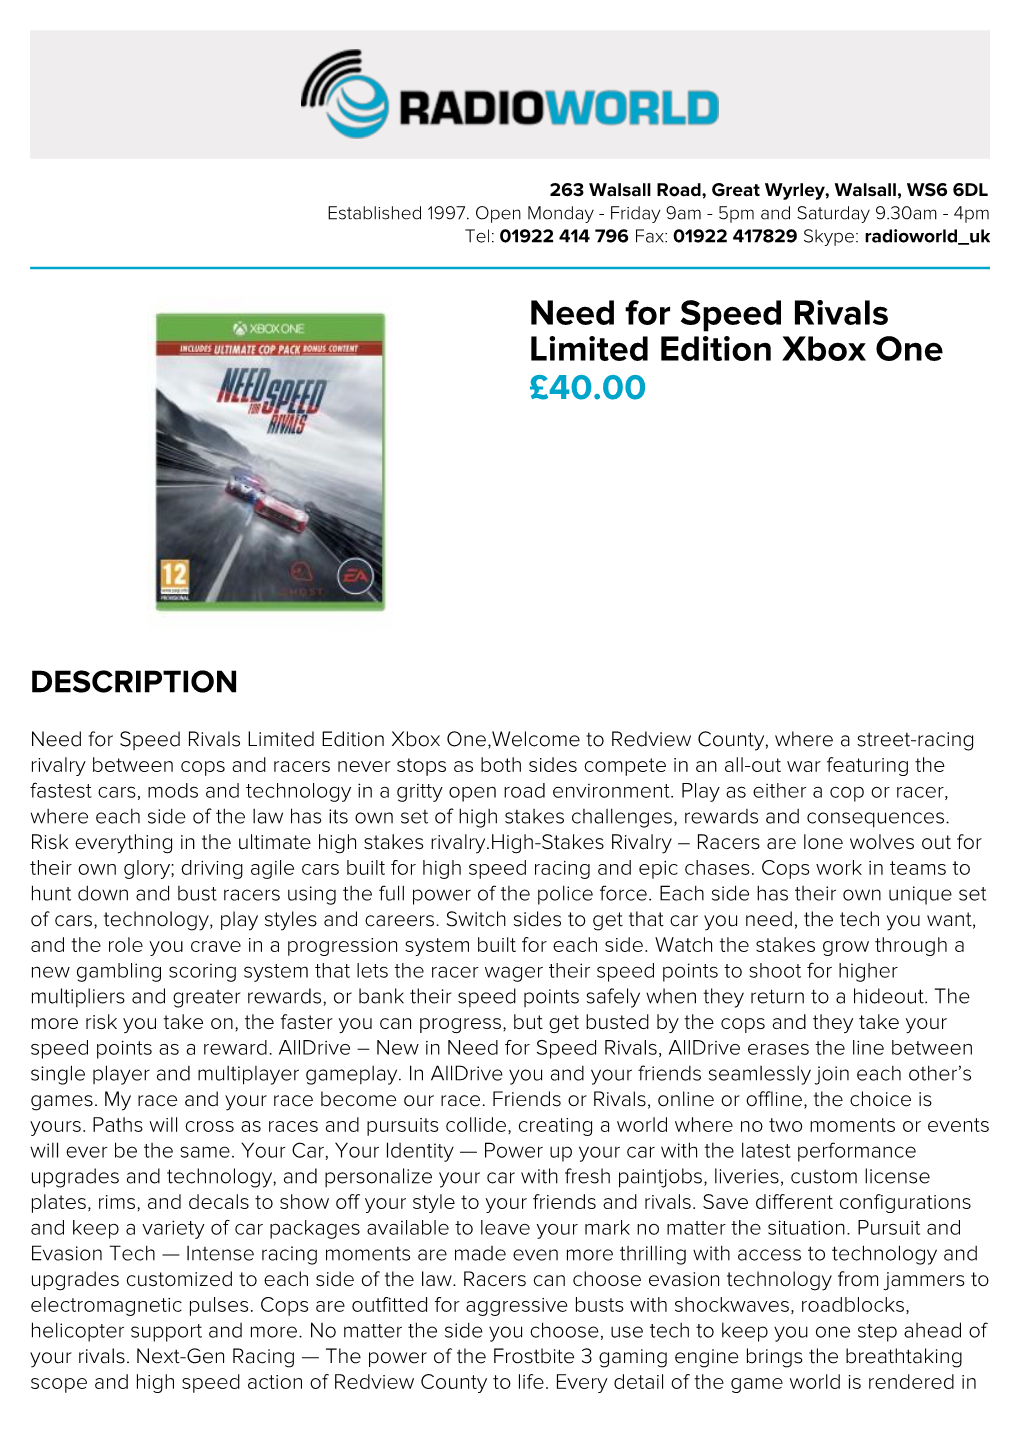 Need for Speed Rivals Limited Edition Xbox One £40.00